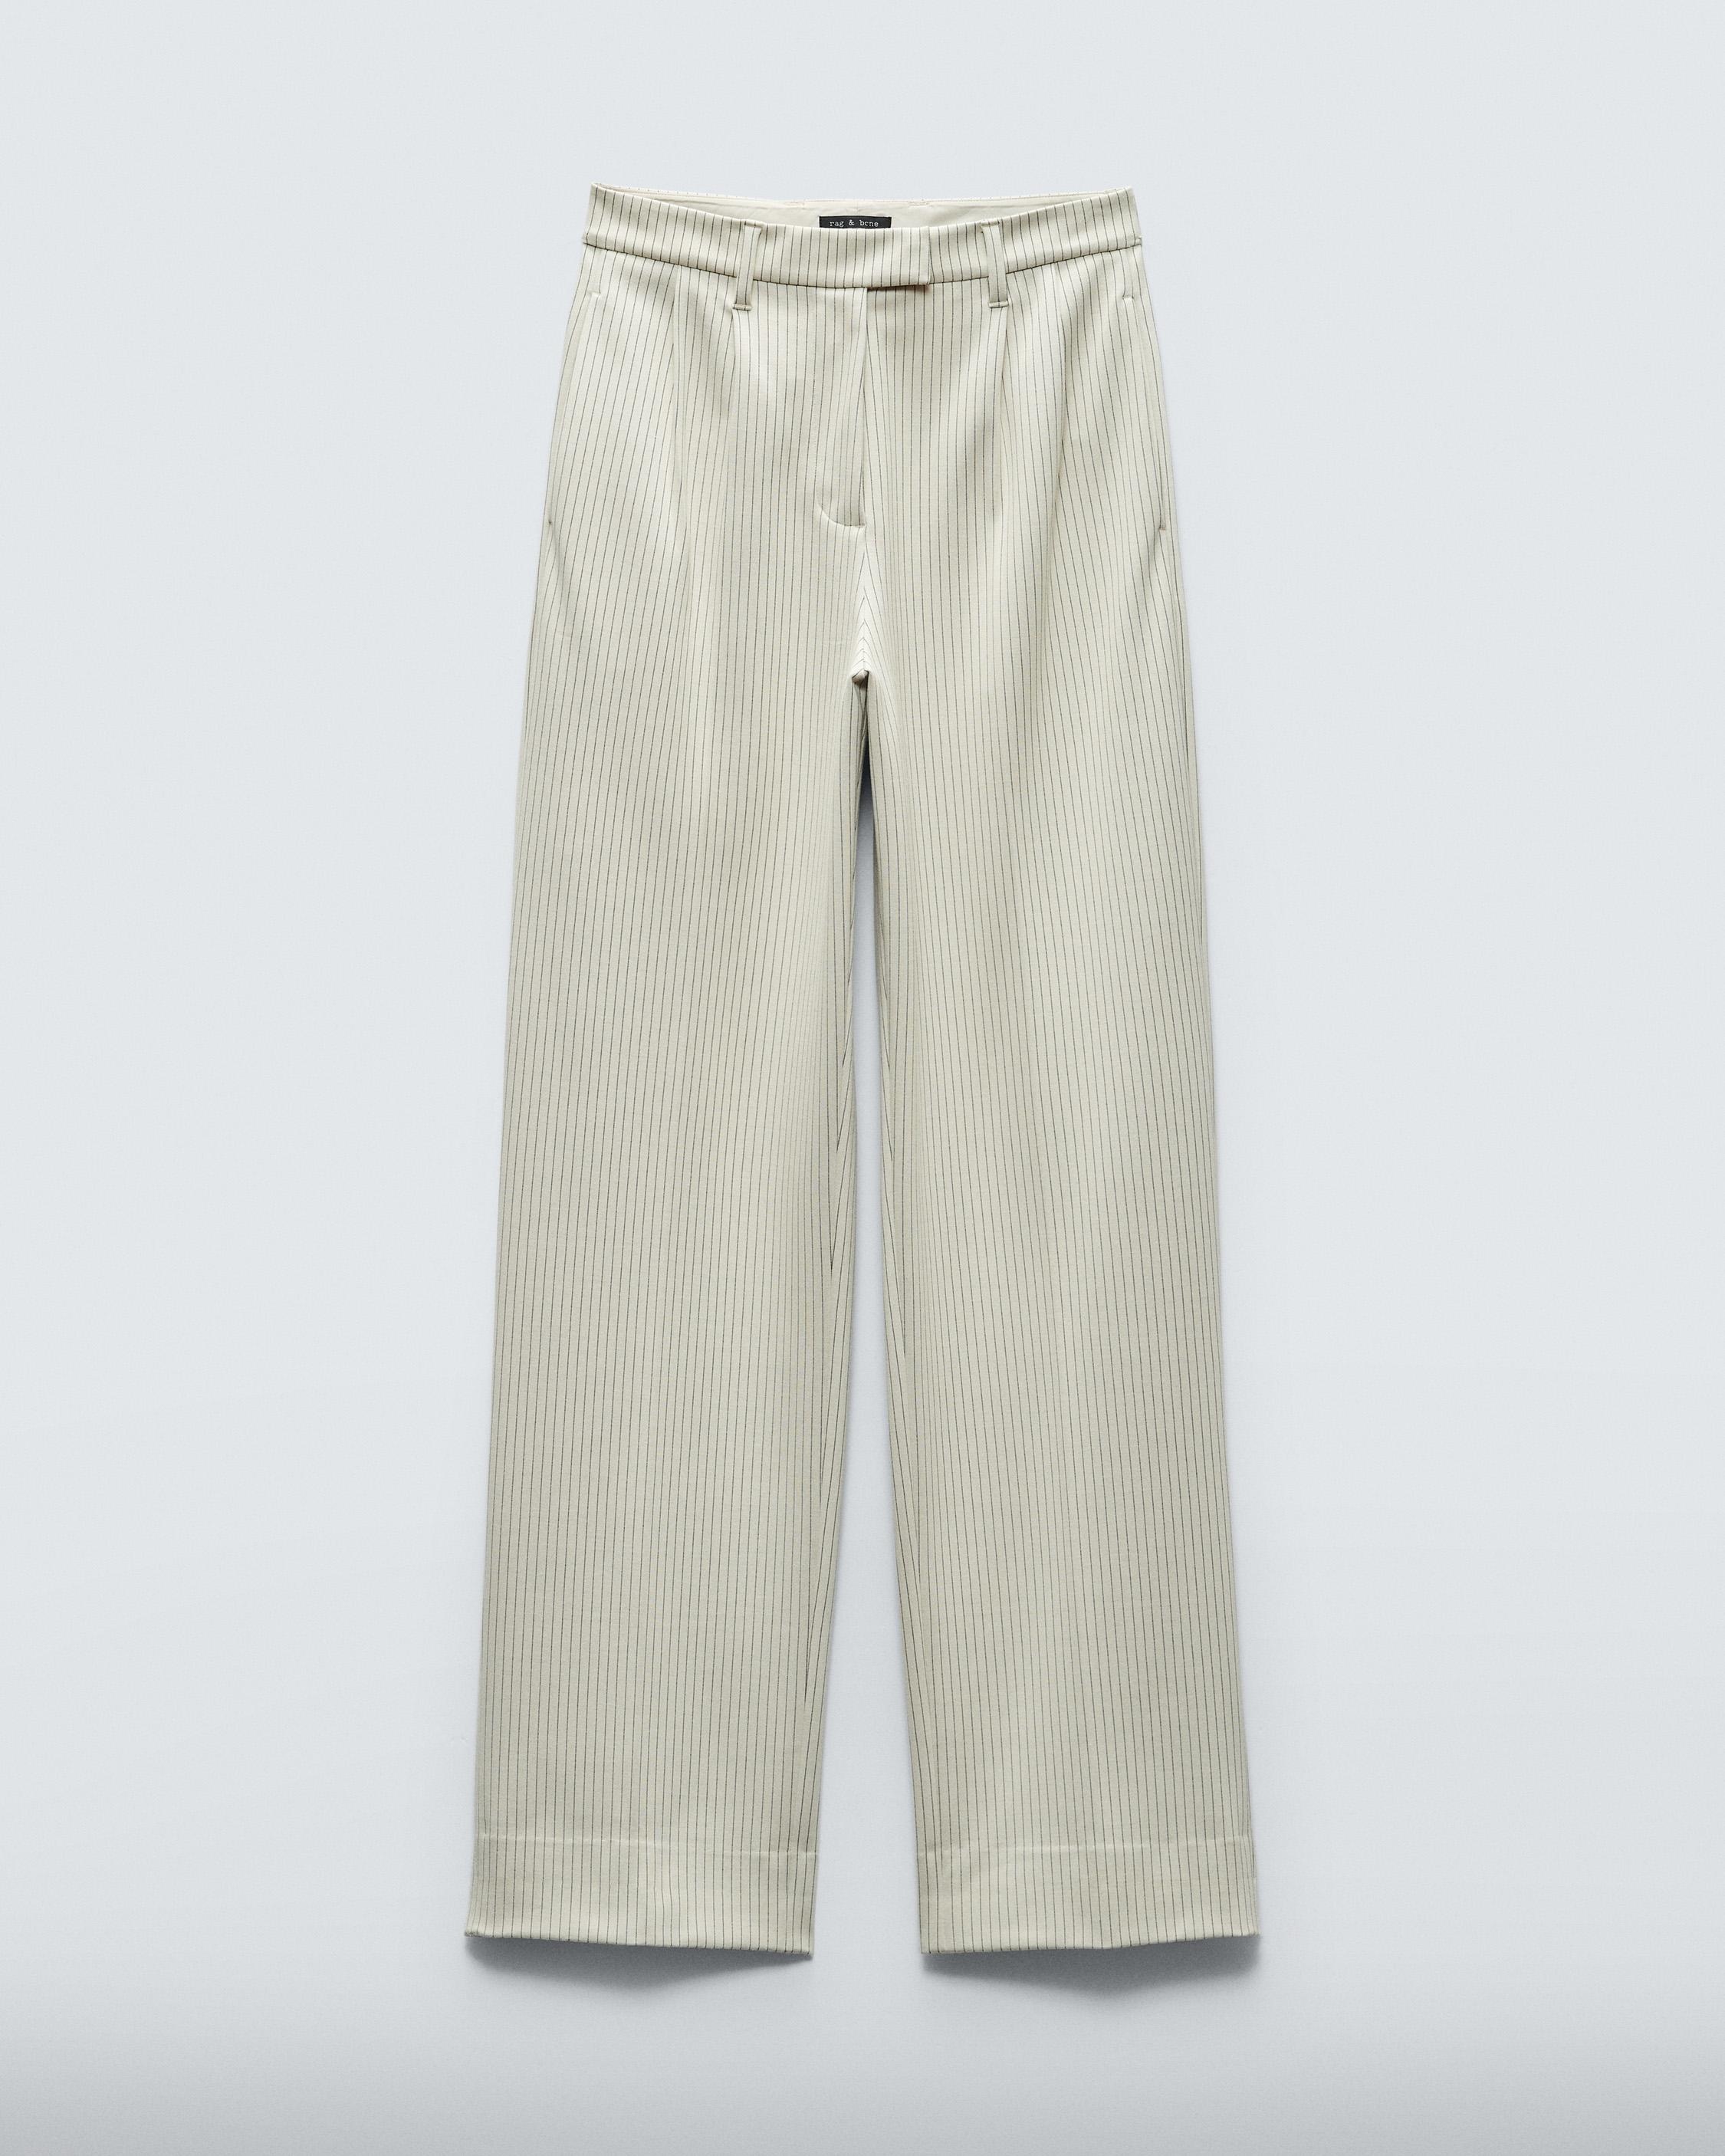 Marianne Ponte Pant
Relaxed Fit - 1